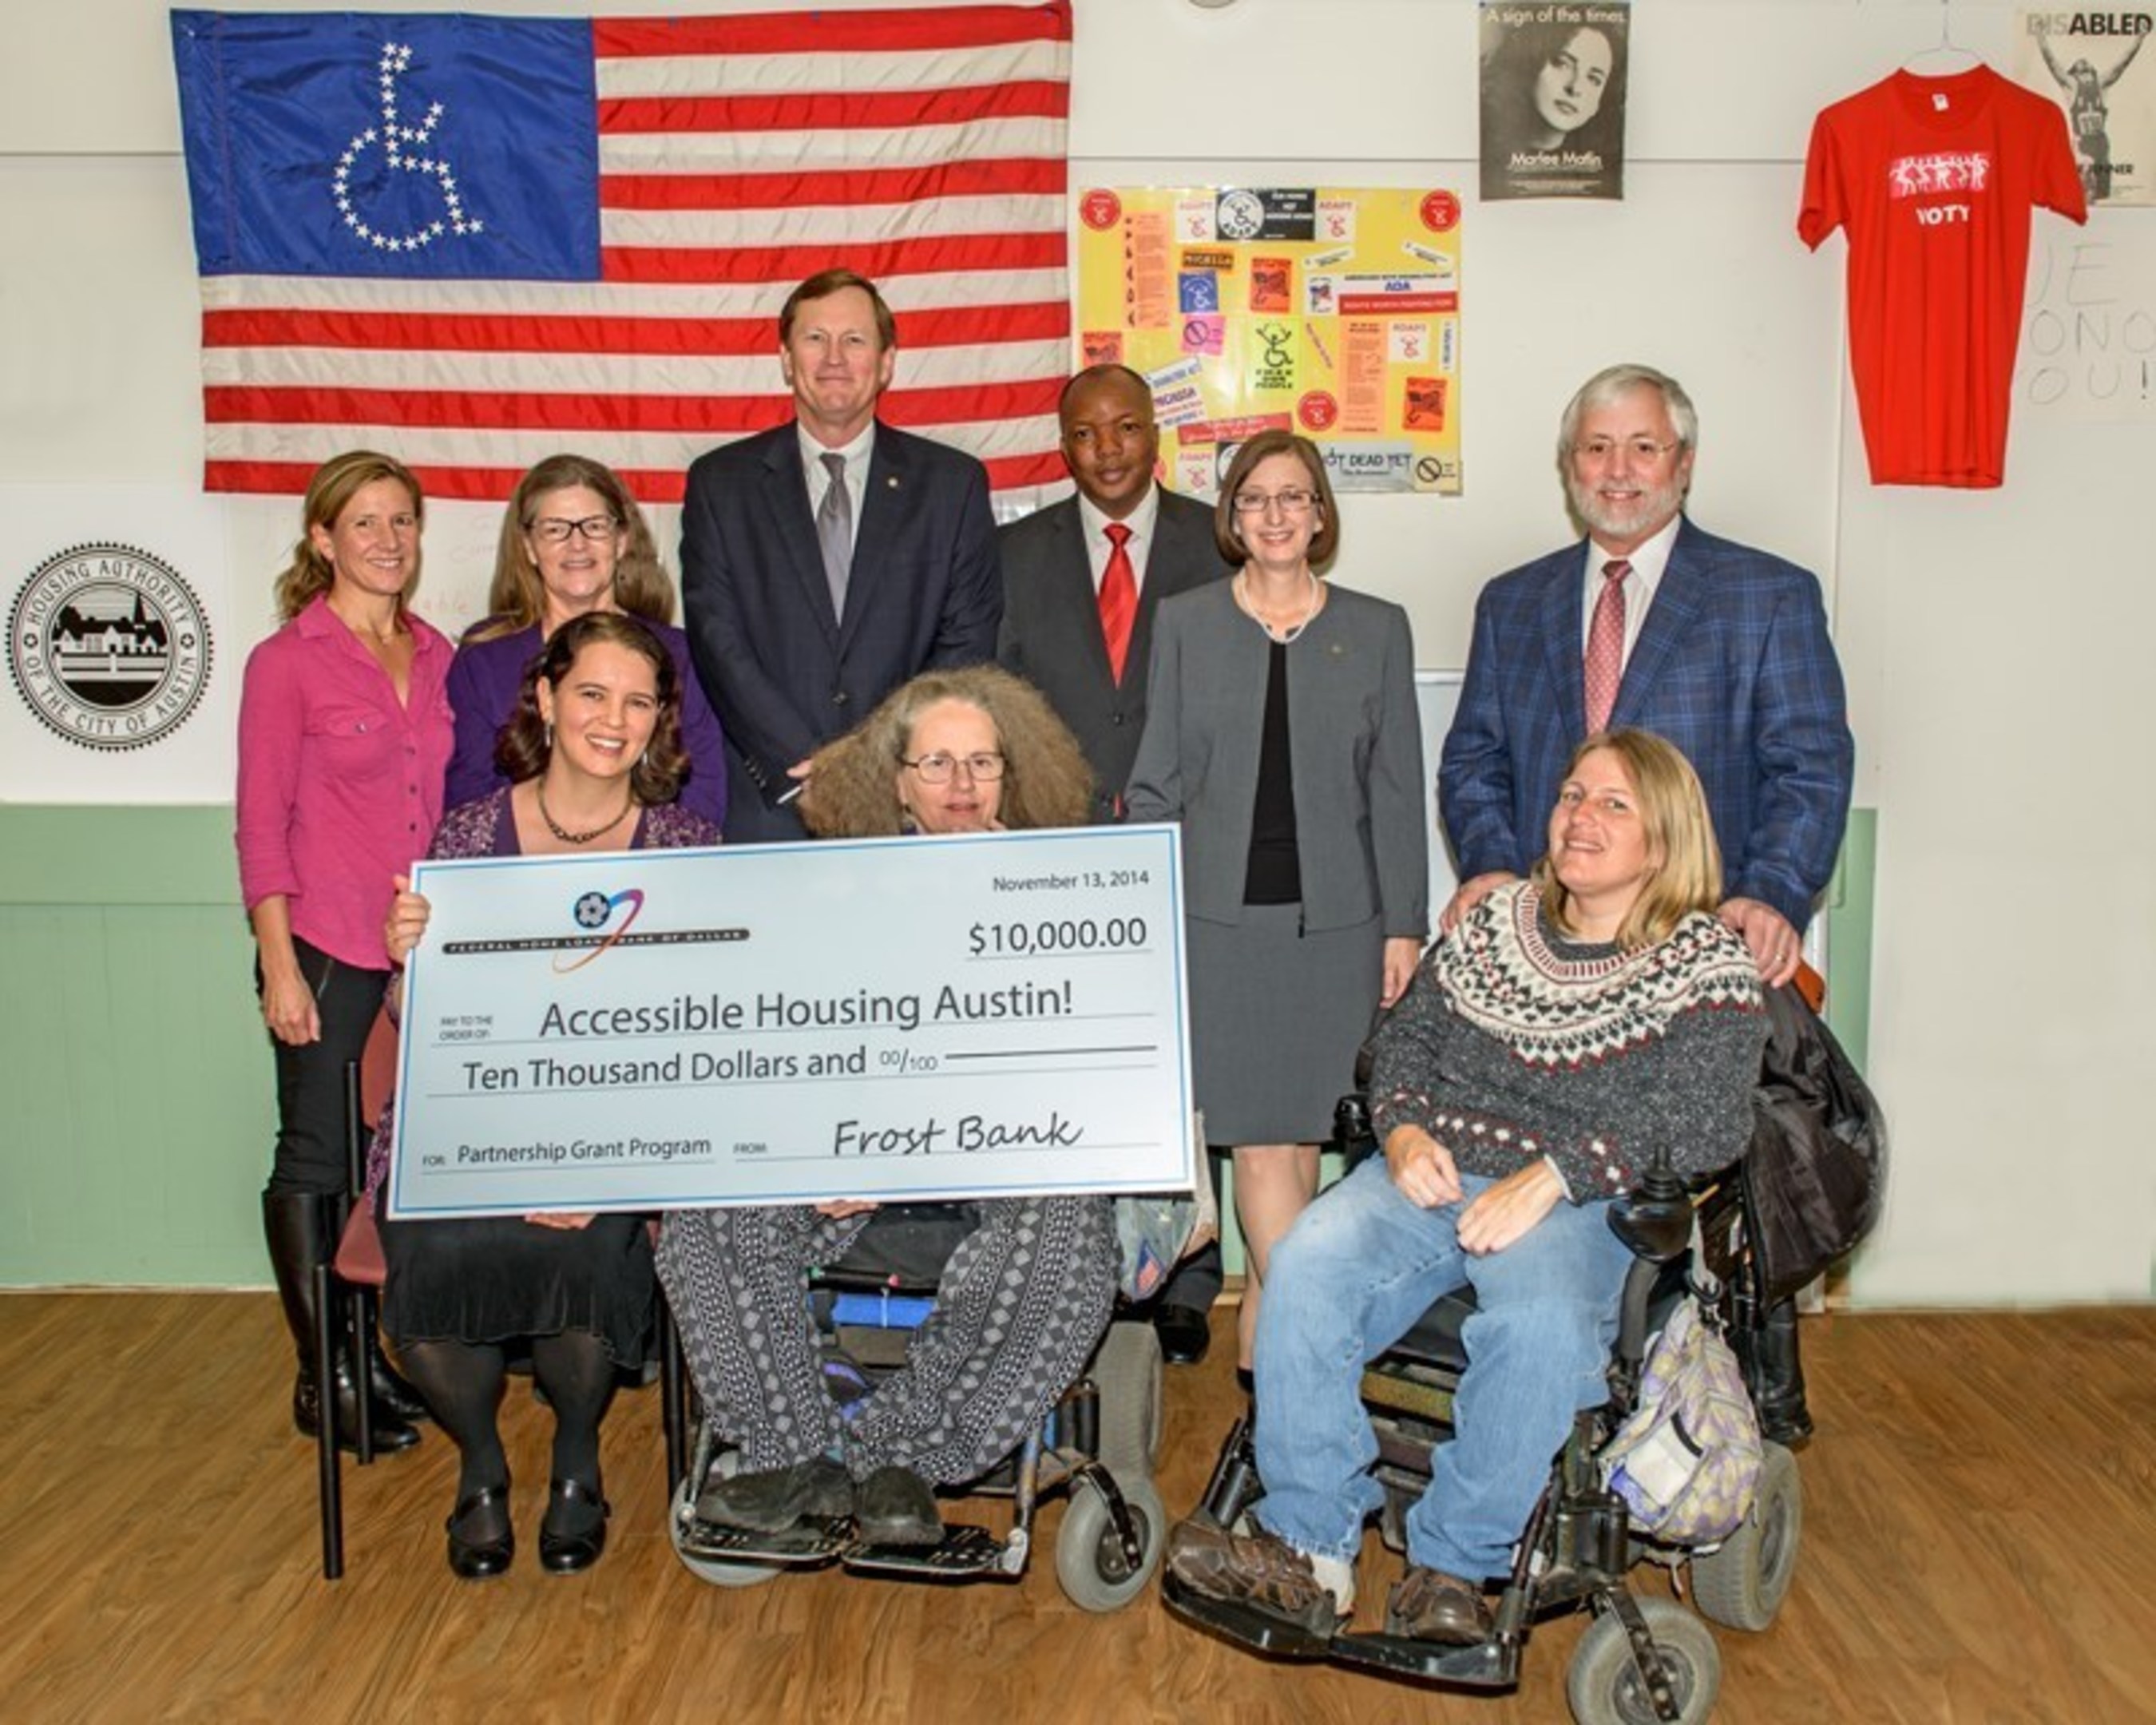 Accessible Housing Austin! (AHA!), Austin's only housing nonprofit led by members of the disability community, today received a $10,000 Partnership Grant Program (PGP) award from Frost Bank and the Federal Home Loan Bank of Dallas (FHLB Dallas). The funding will be used to support operations as the organization develops a 20- to 27-unit apartment complex in partnership with the Housing Authority of the City of Austin.